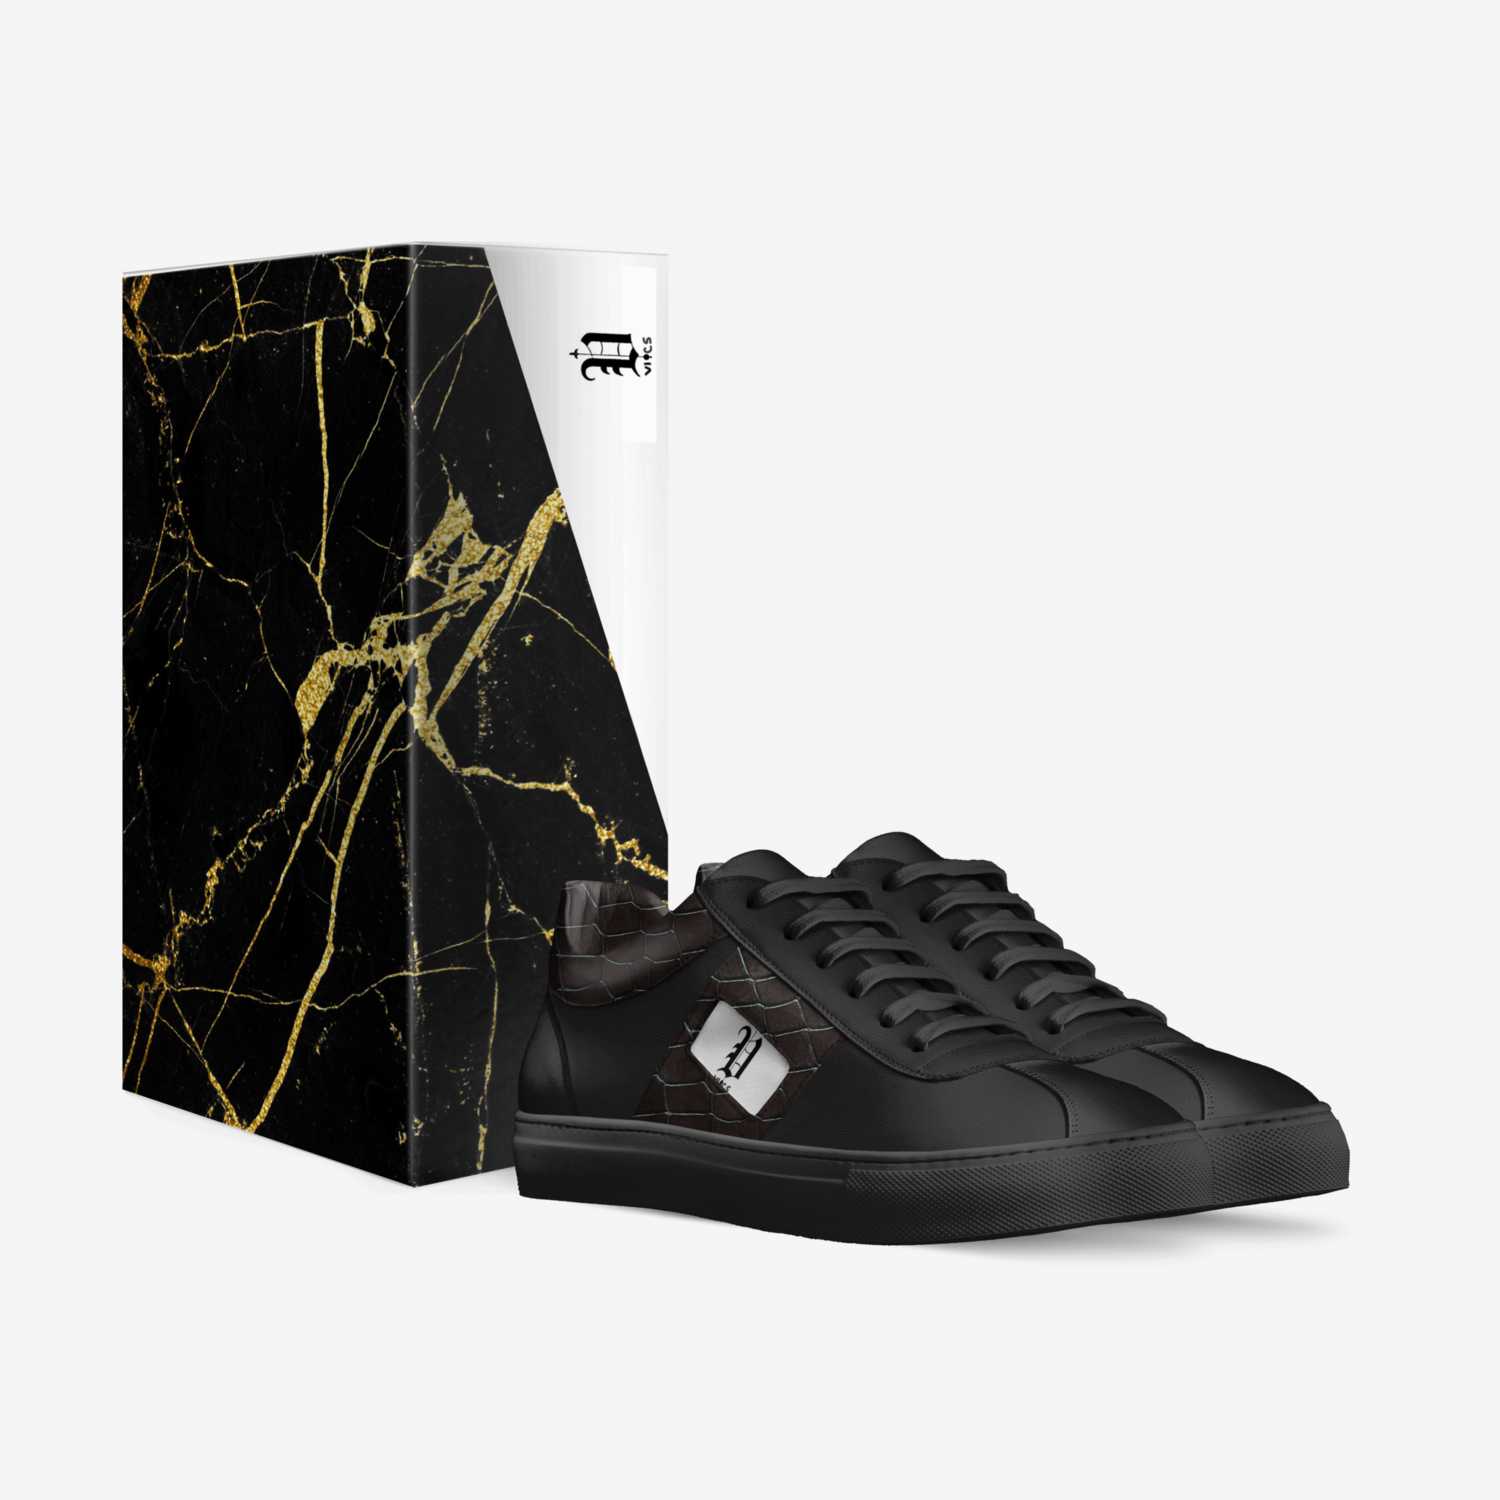 vics concept custom made in Italy shoes by Brayden Murphy | Box view